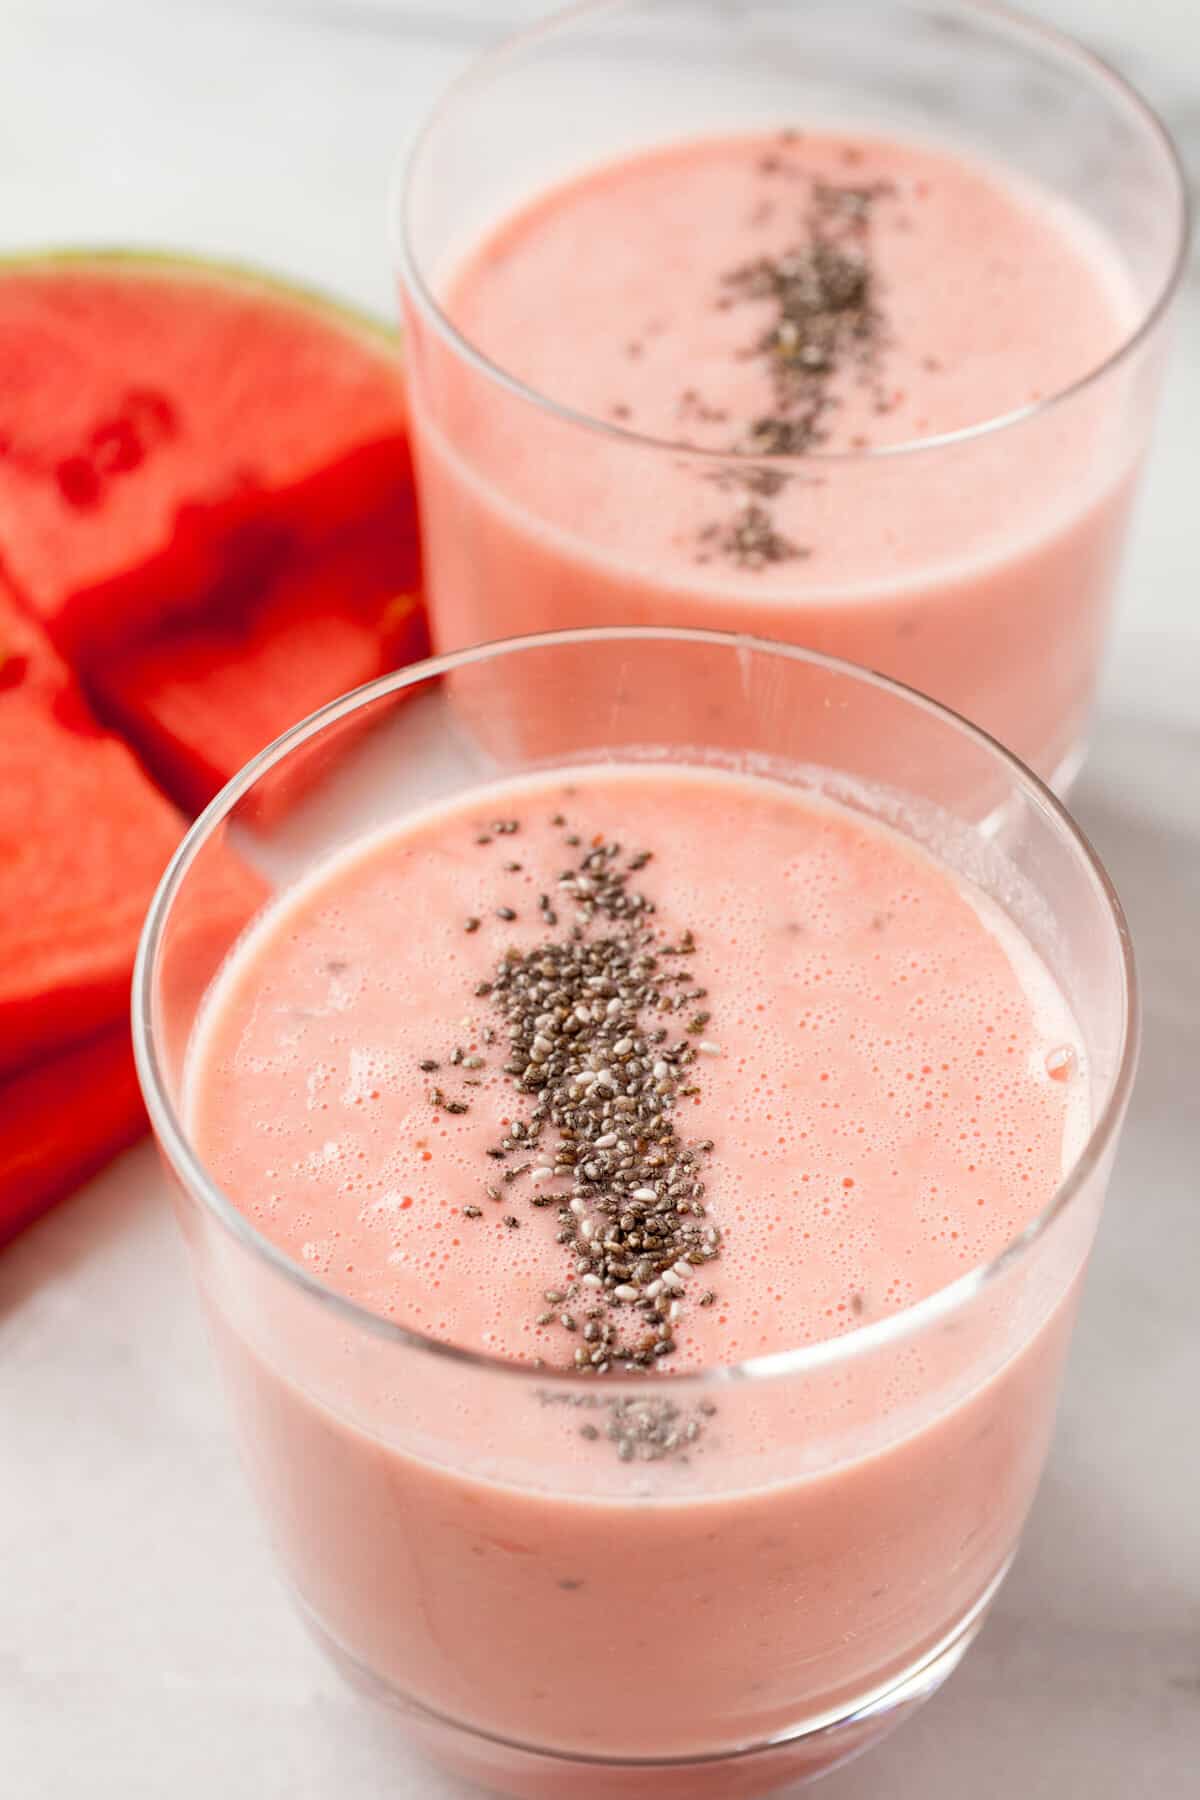 Creamy Watermelon Honey Smoothie: Light and refreshing, watermelon is the perfect base for a quick smoothie. This version gets some extra help from Greek yogurt, chia, and honey. So good! | macheesmo.com